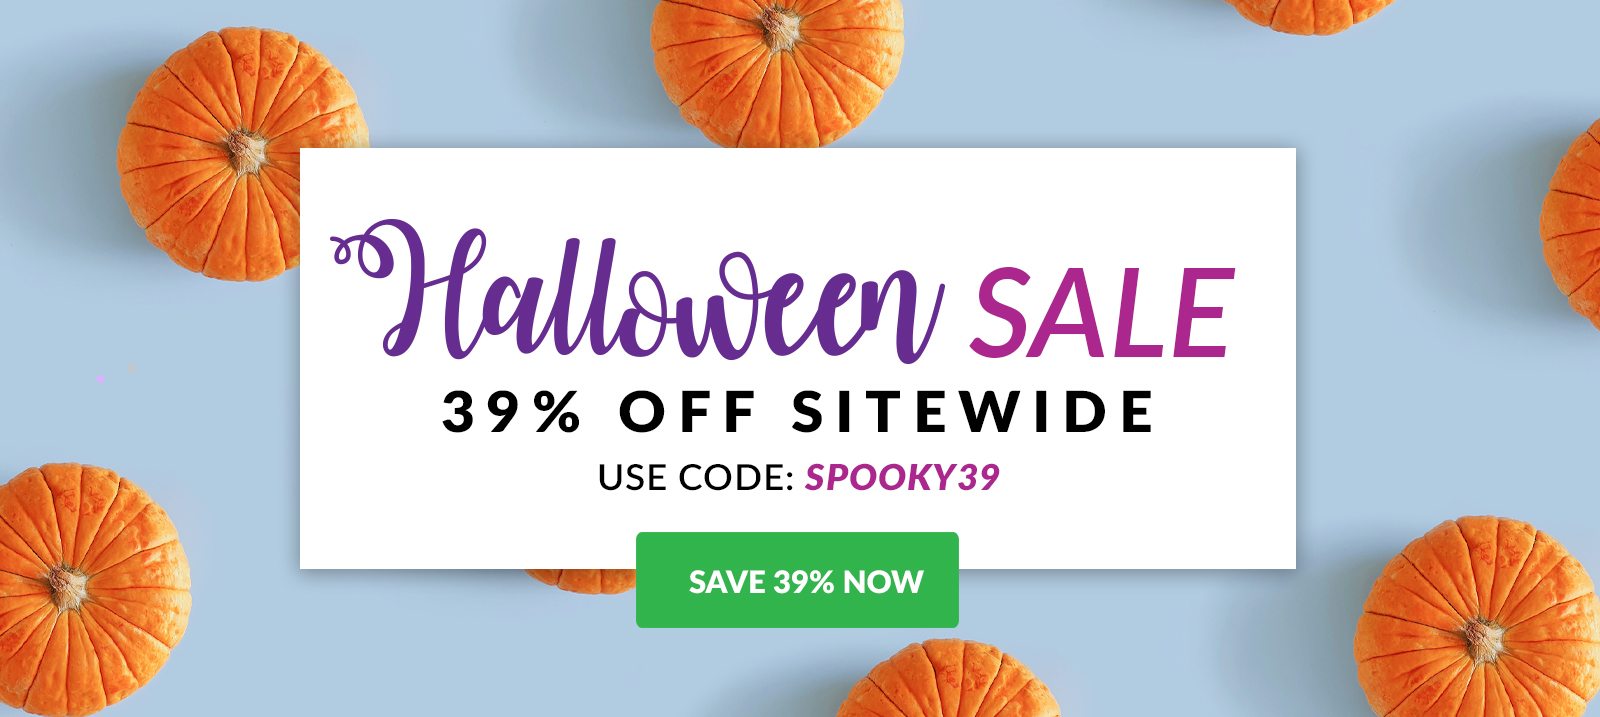 LIMITED TIME: Save 39% sitewide with code SPOOKY39 - no limits or minimums!